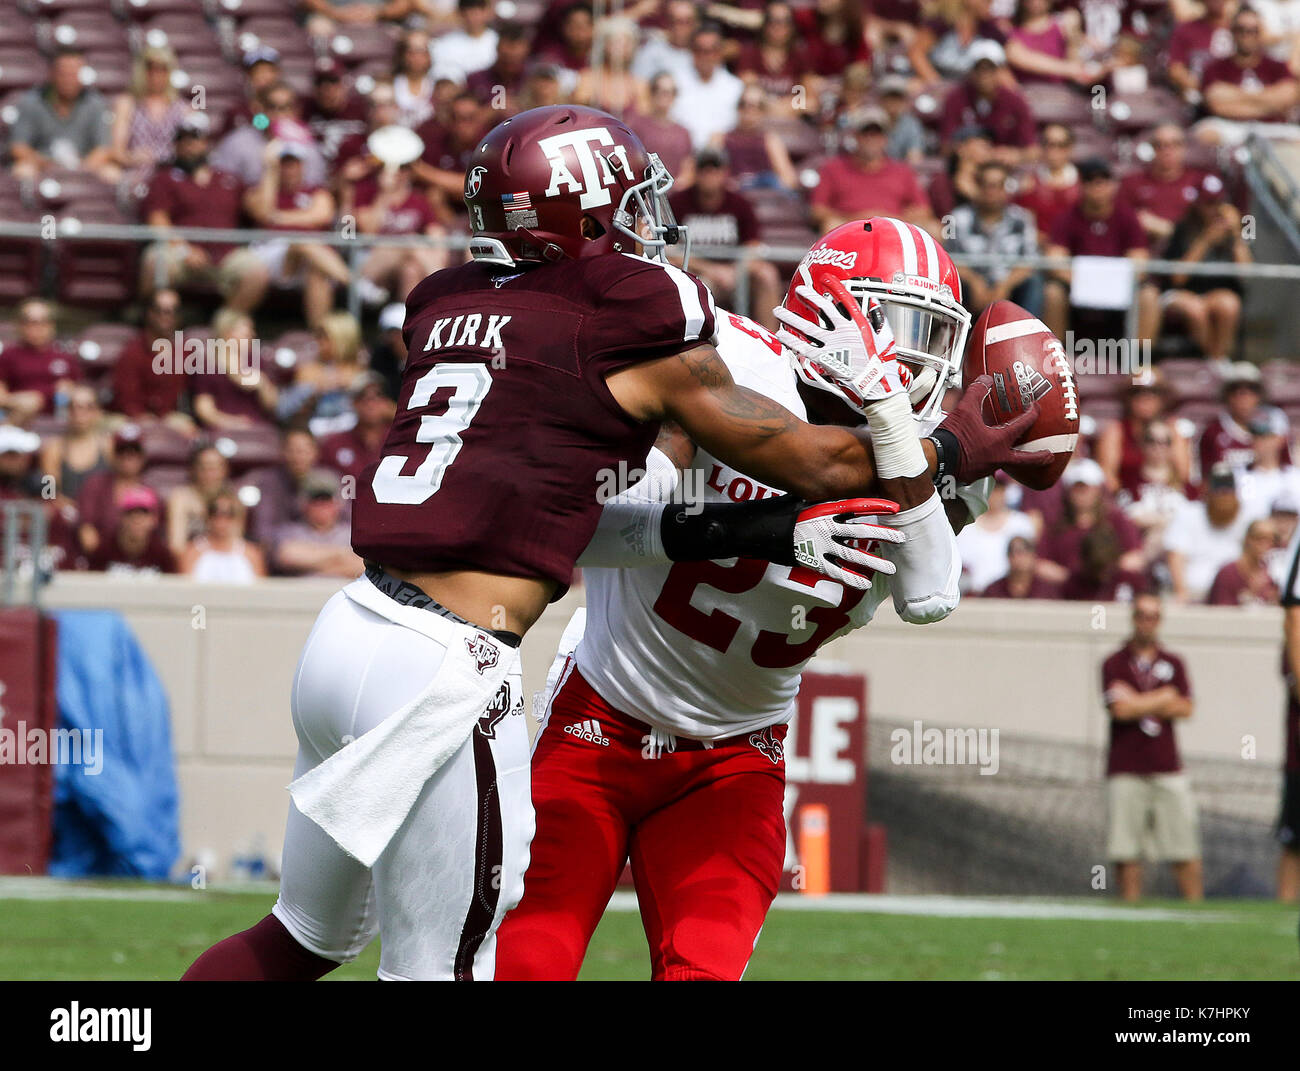 September 16, 2017: Louisiana-Lafayette Ragin Cajuns defensive back Tracy Walker (23) breaks up a pass intended for Texas A&M Aggies wide receiver Christian Kirk (3) in the first quarter during the NCAA football game between the Louisiana-Lafayette Ragin Cajuns and the Texas A&M Aggies at Kyle Field in College Station, TX; John Glaser/CSM. Stock Photo